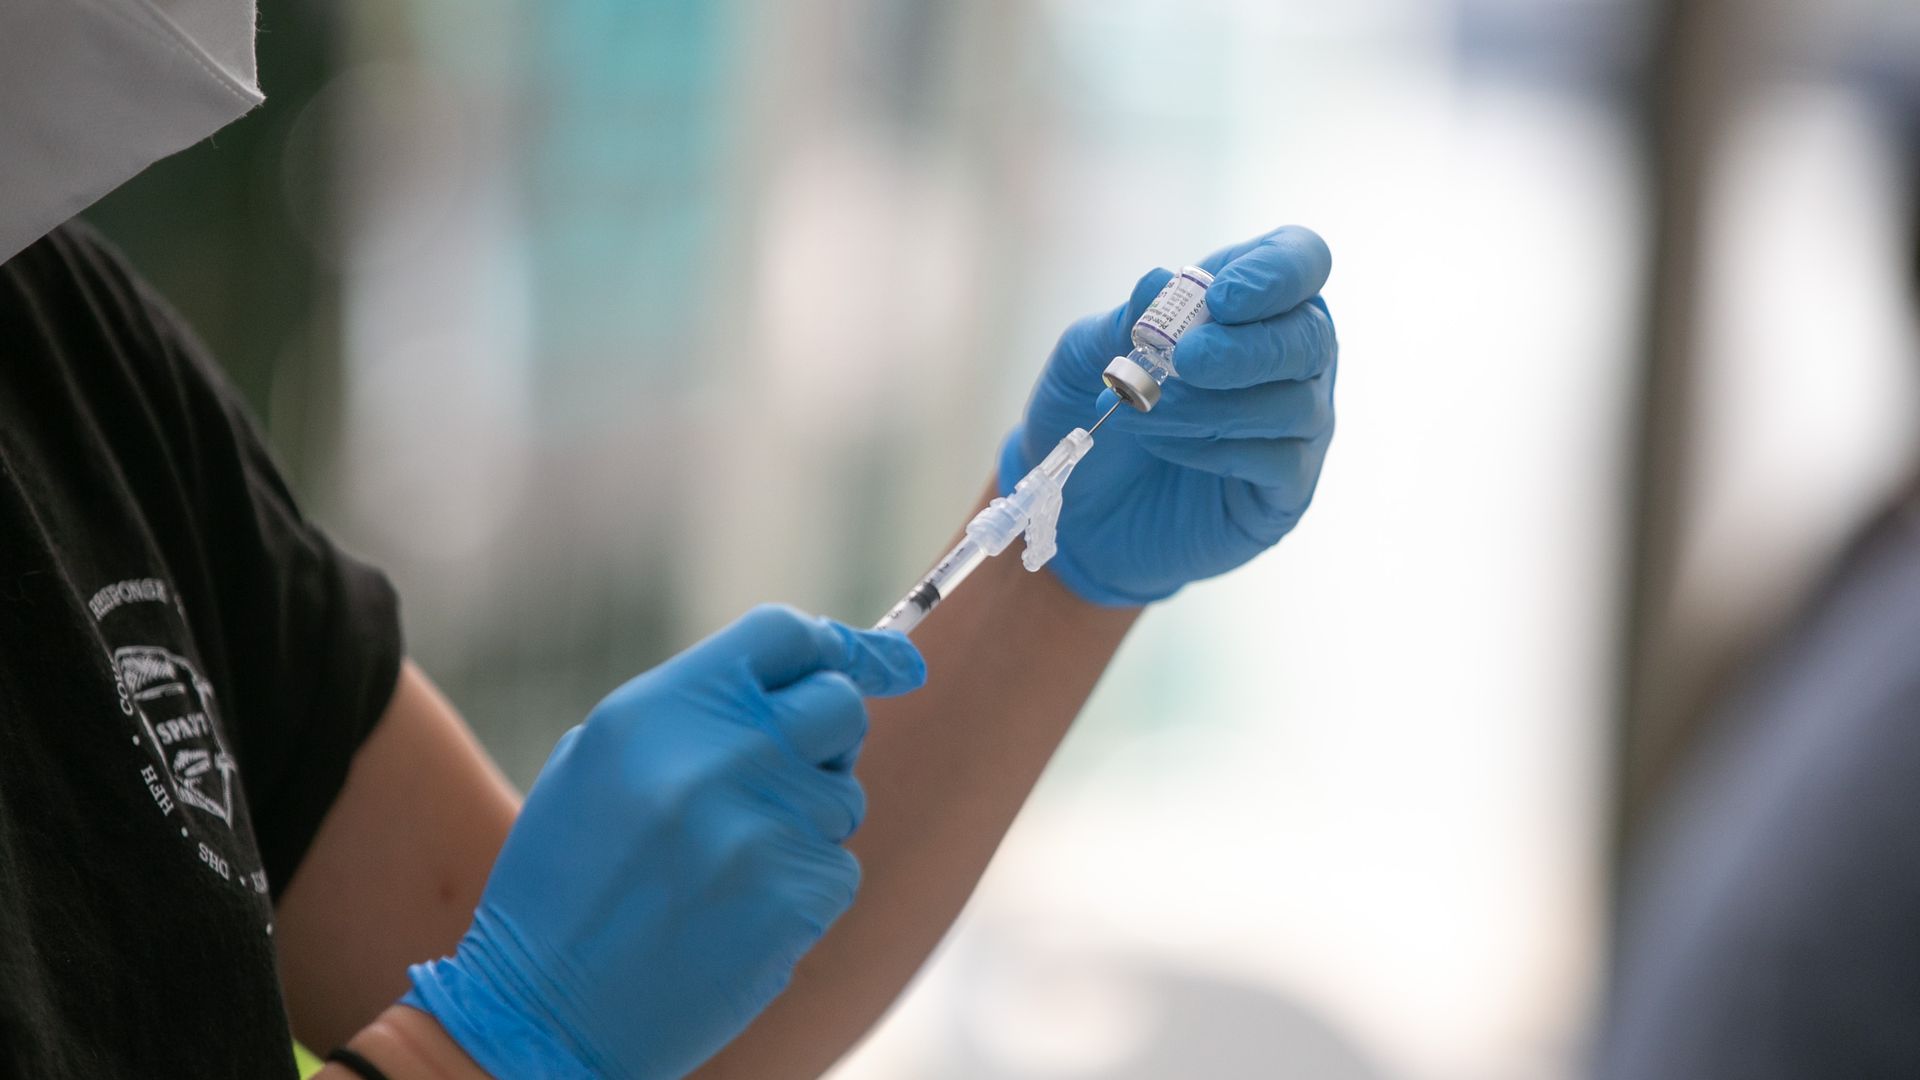 Photo of a medical worker holding up a COVID vaccine shot with gloved hands